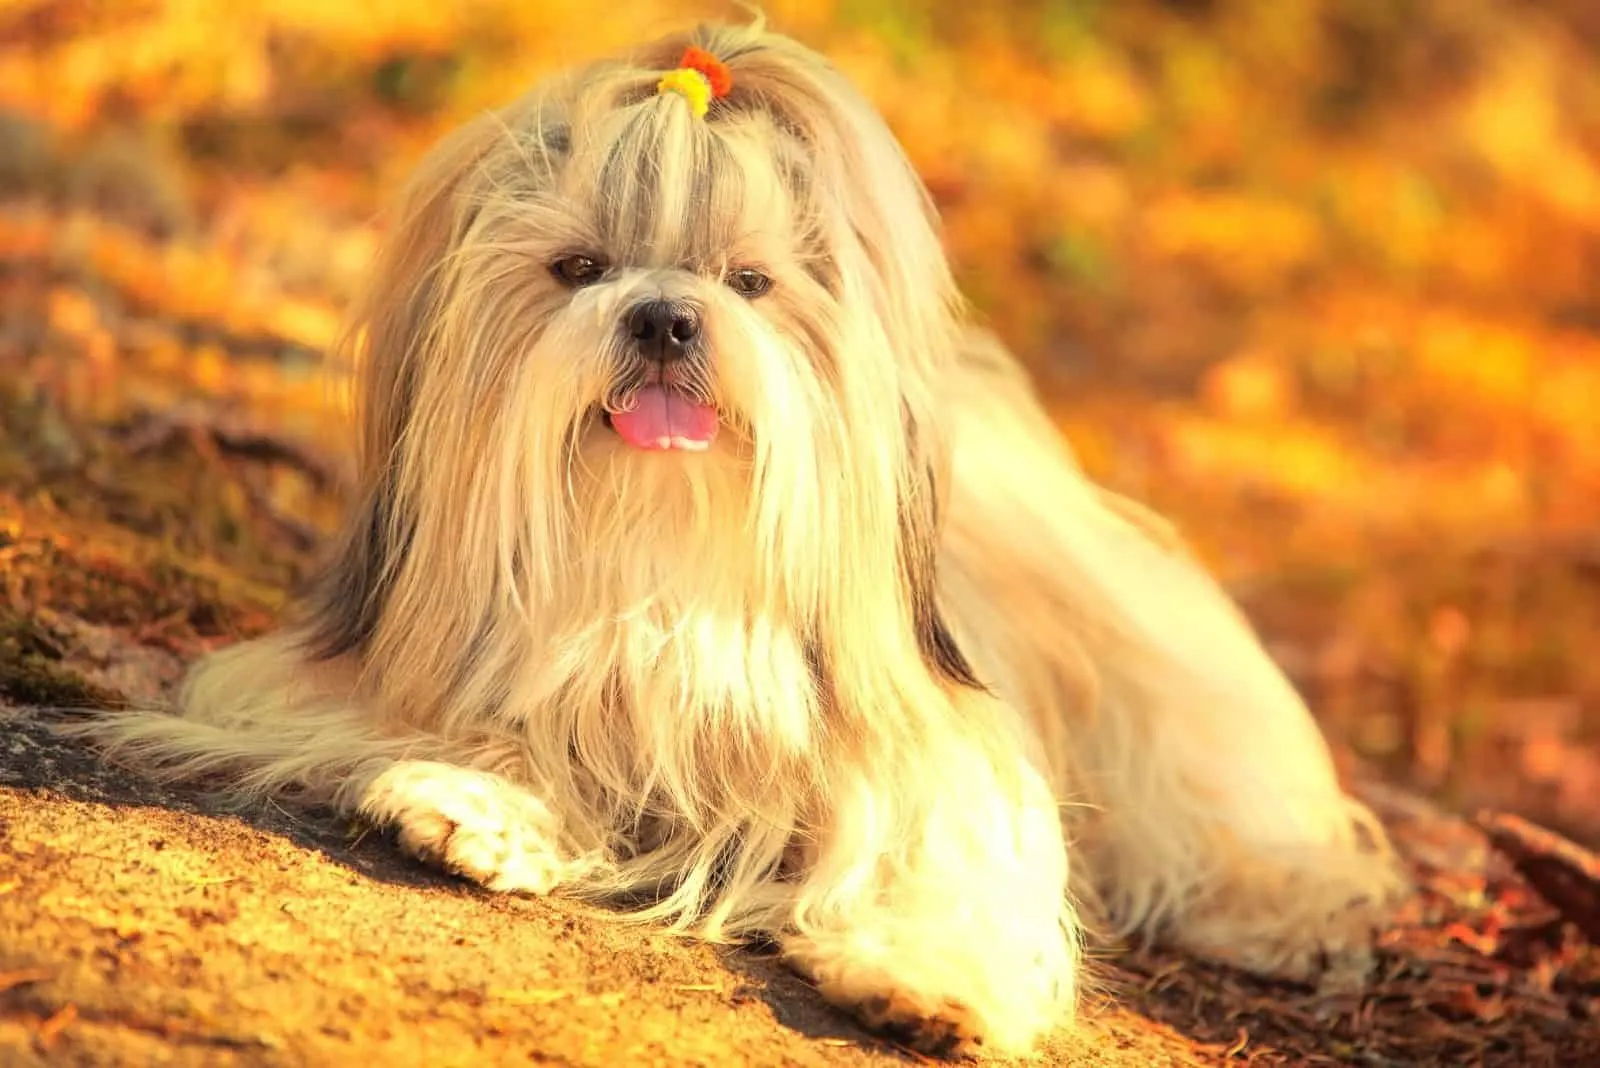 shih-tzu lying down in the mountain on sunset golden colors